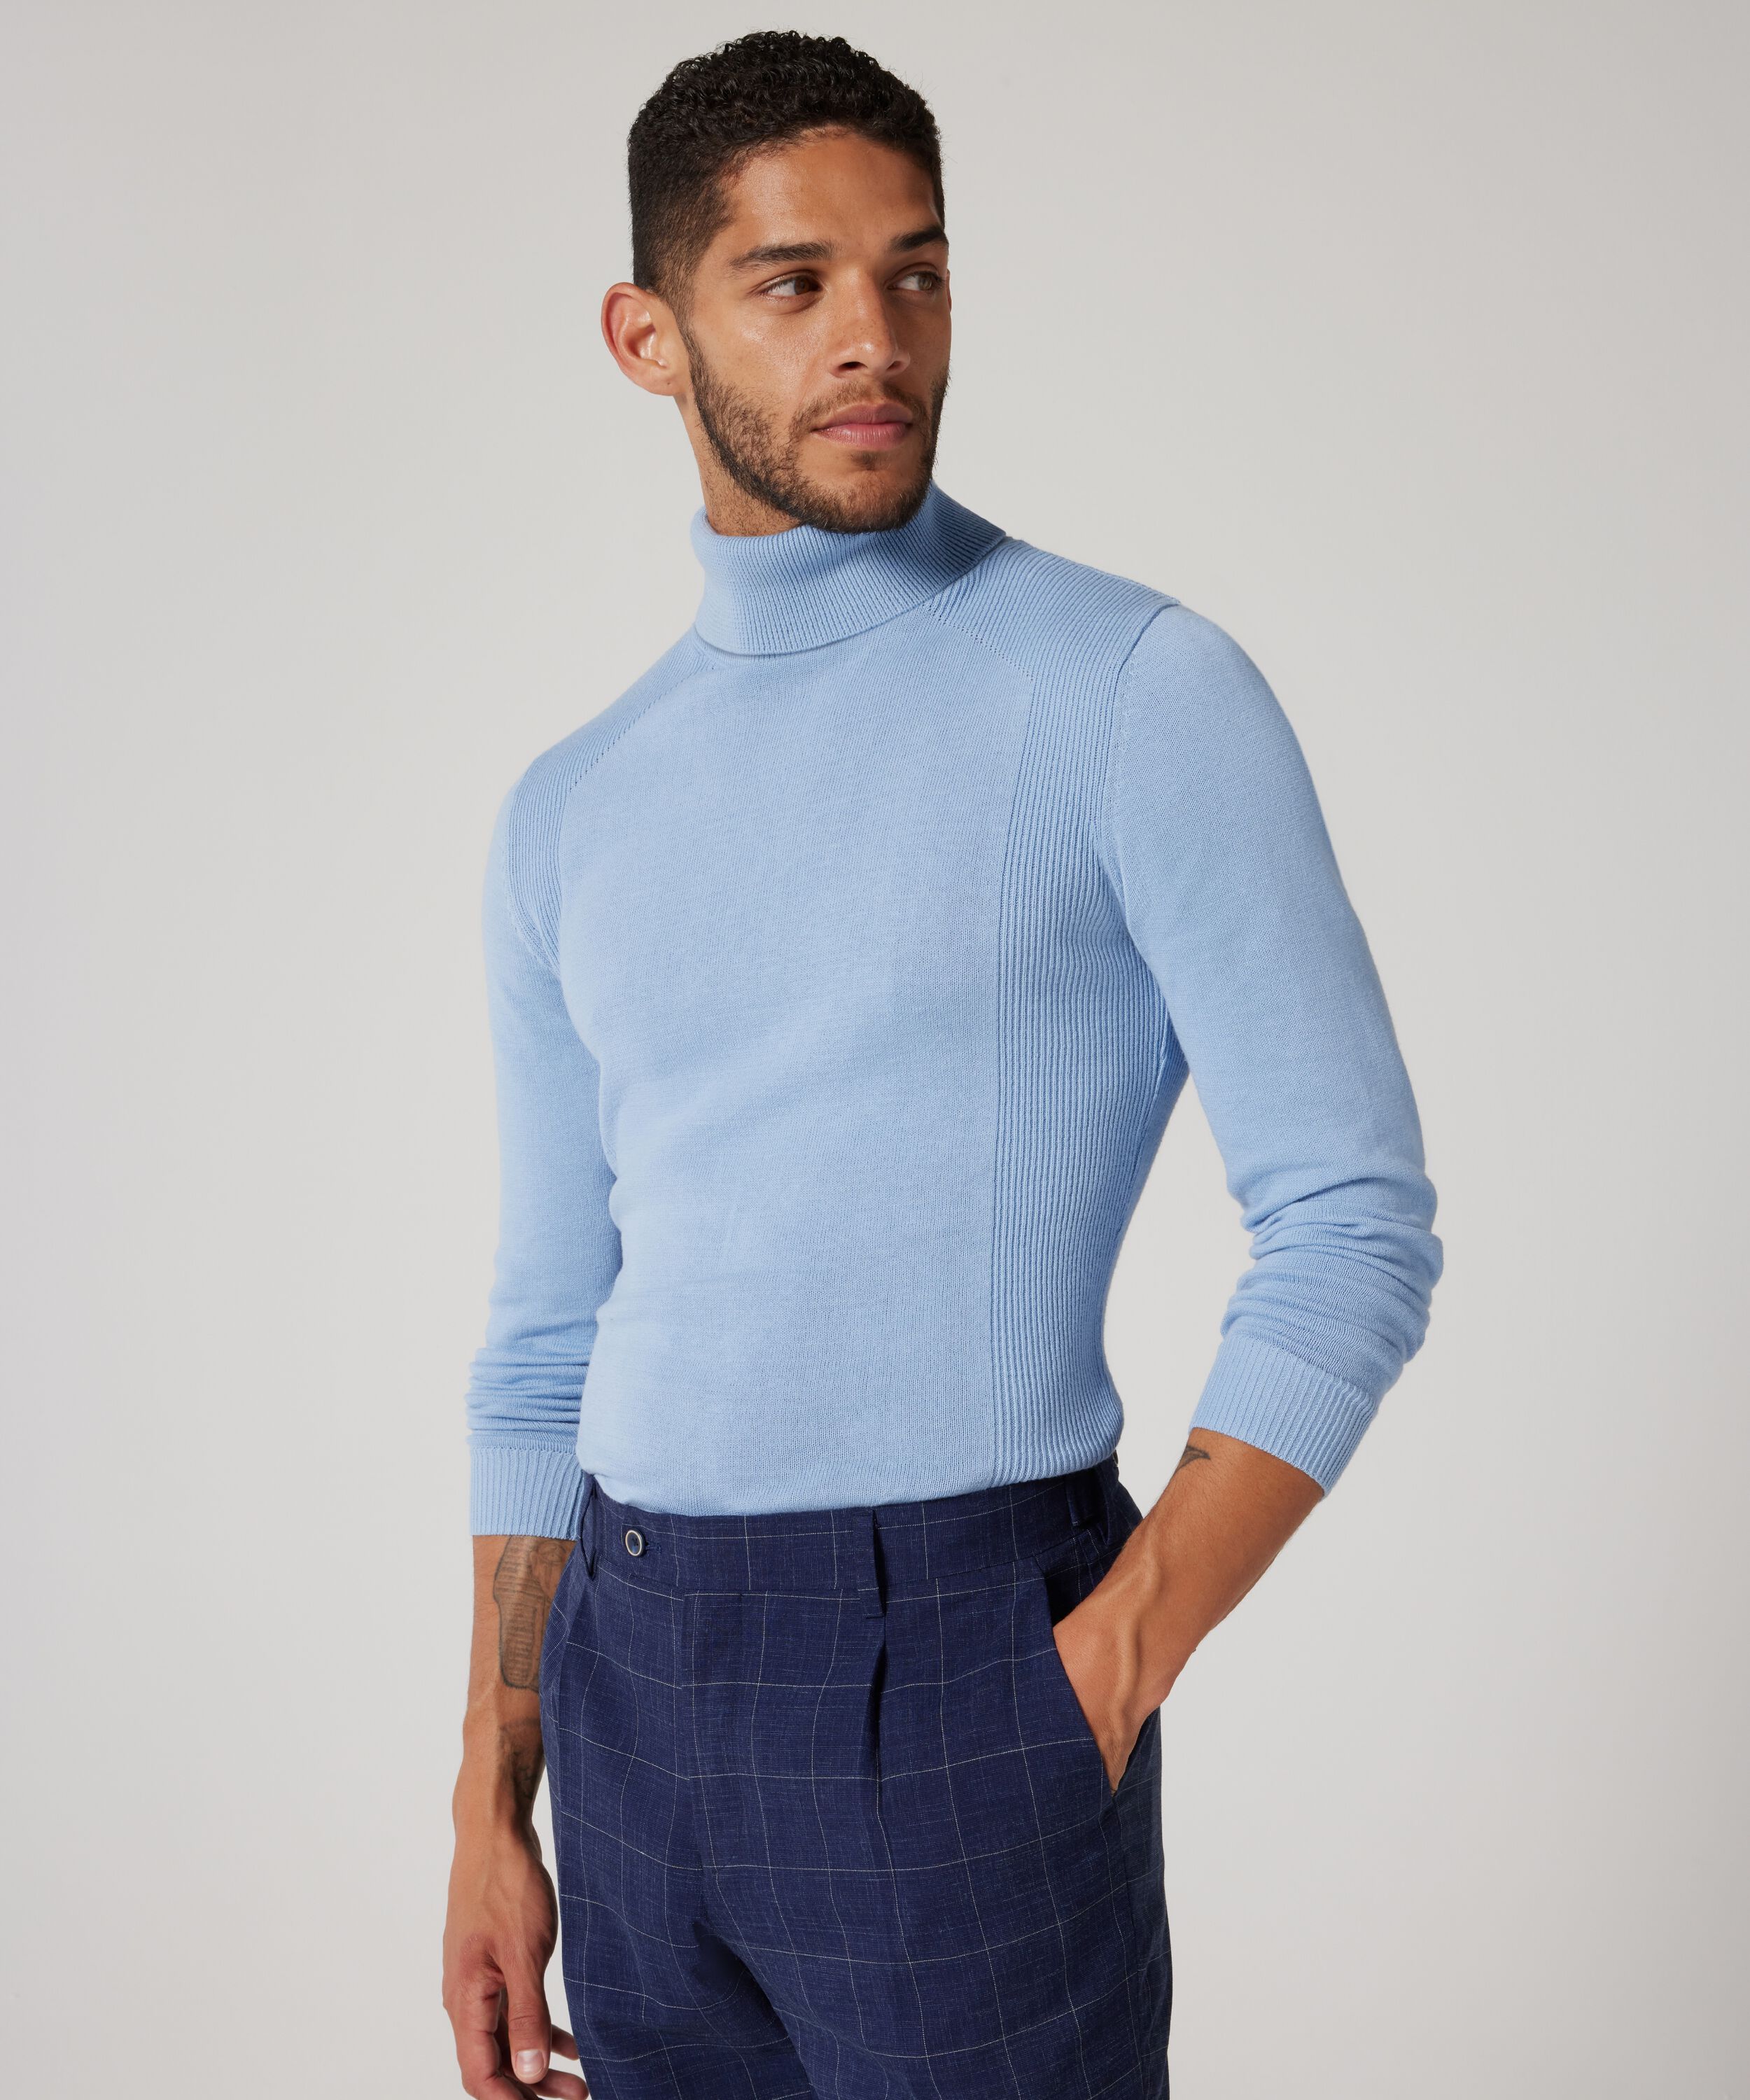 Roll Neck Knit With Rib Detail - Light Blue, Knitwear